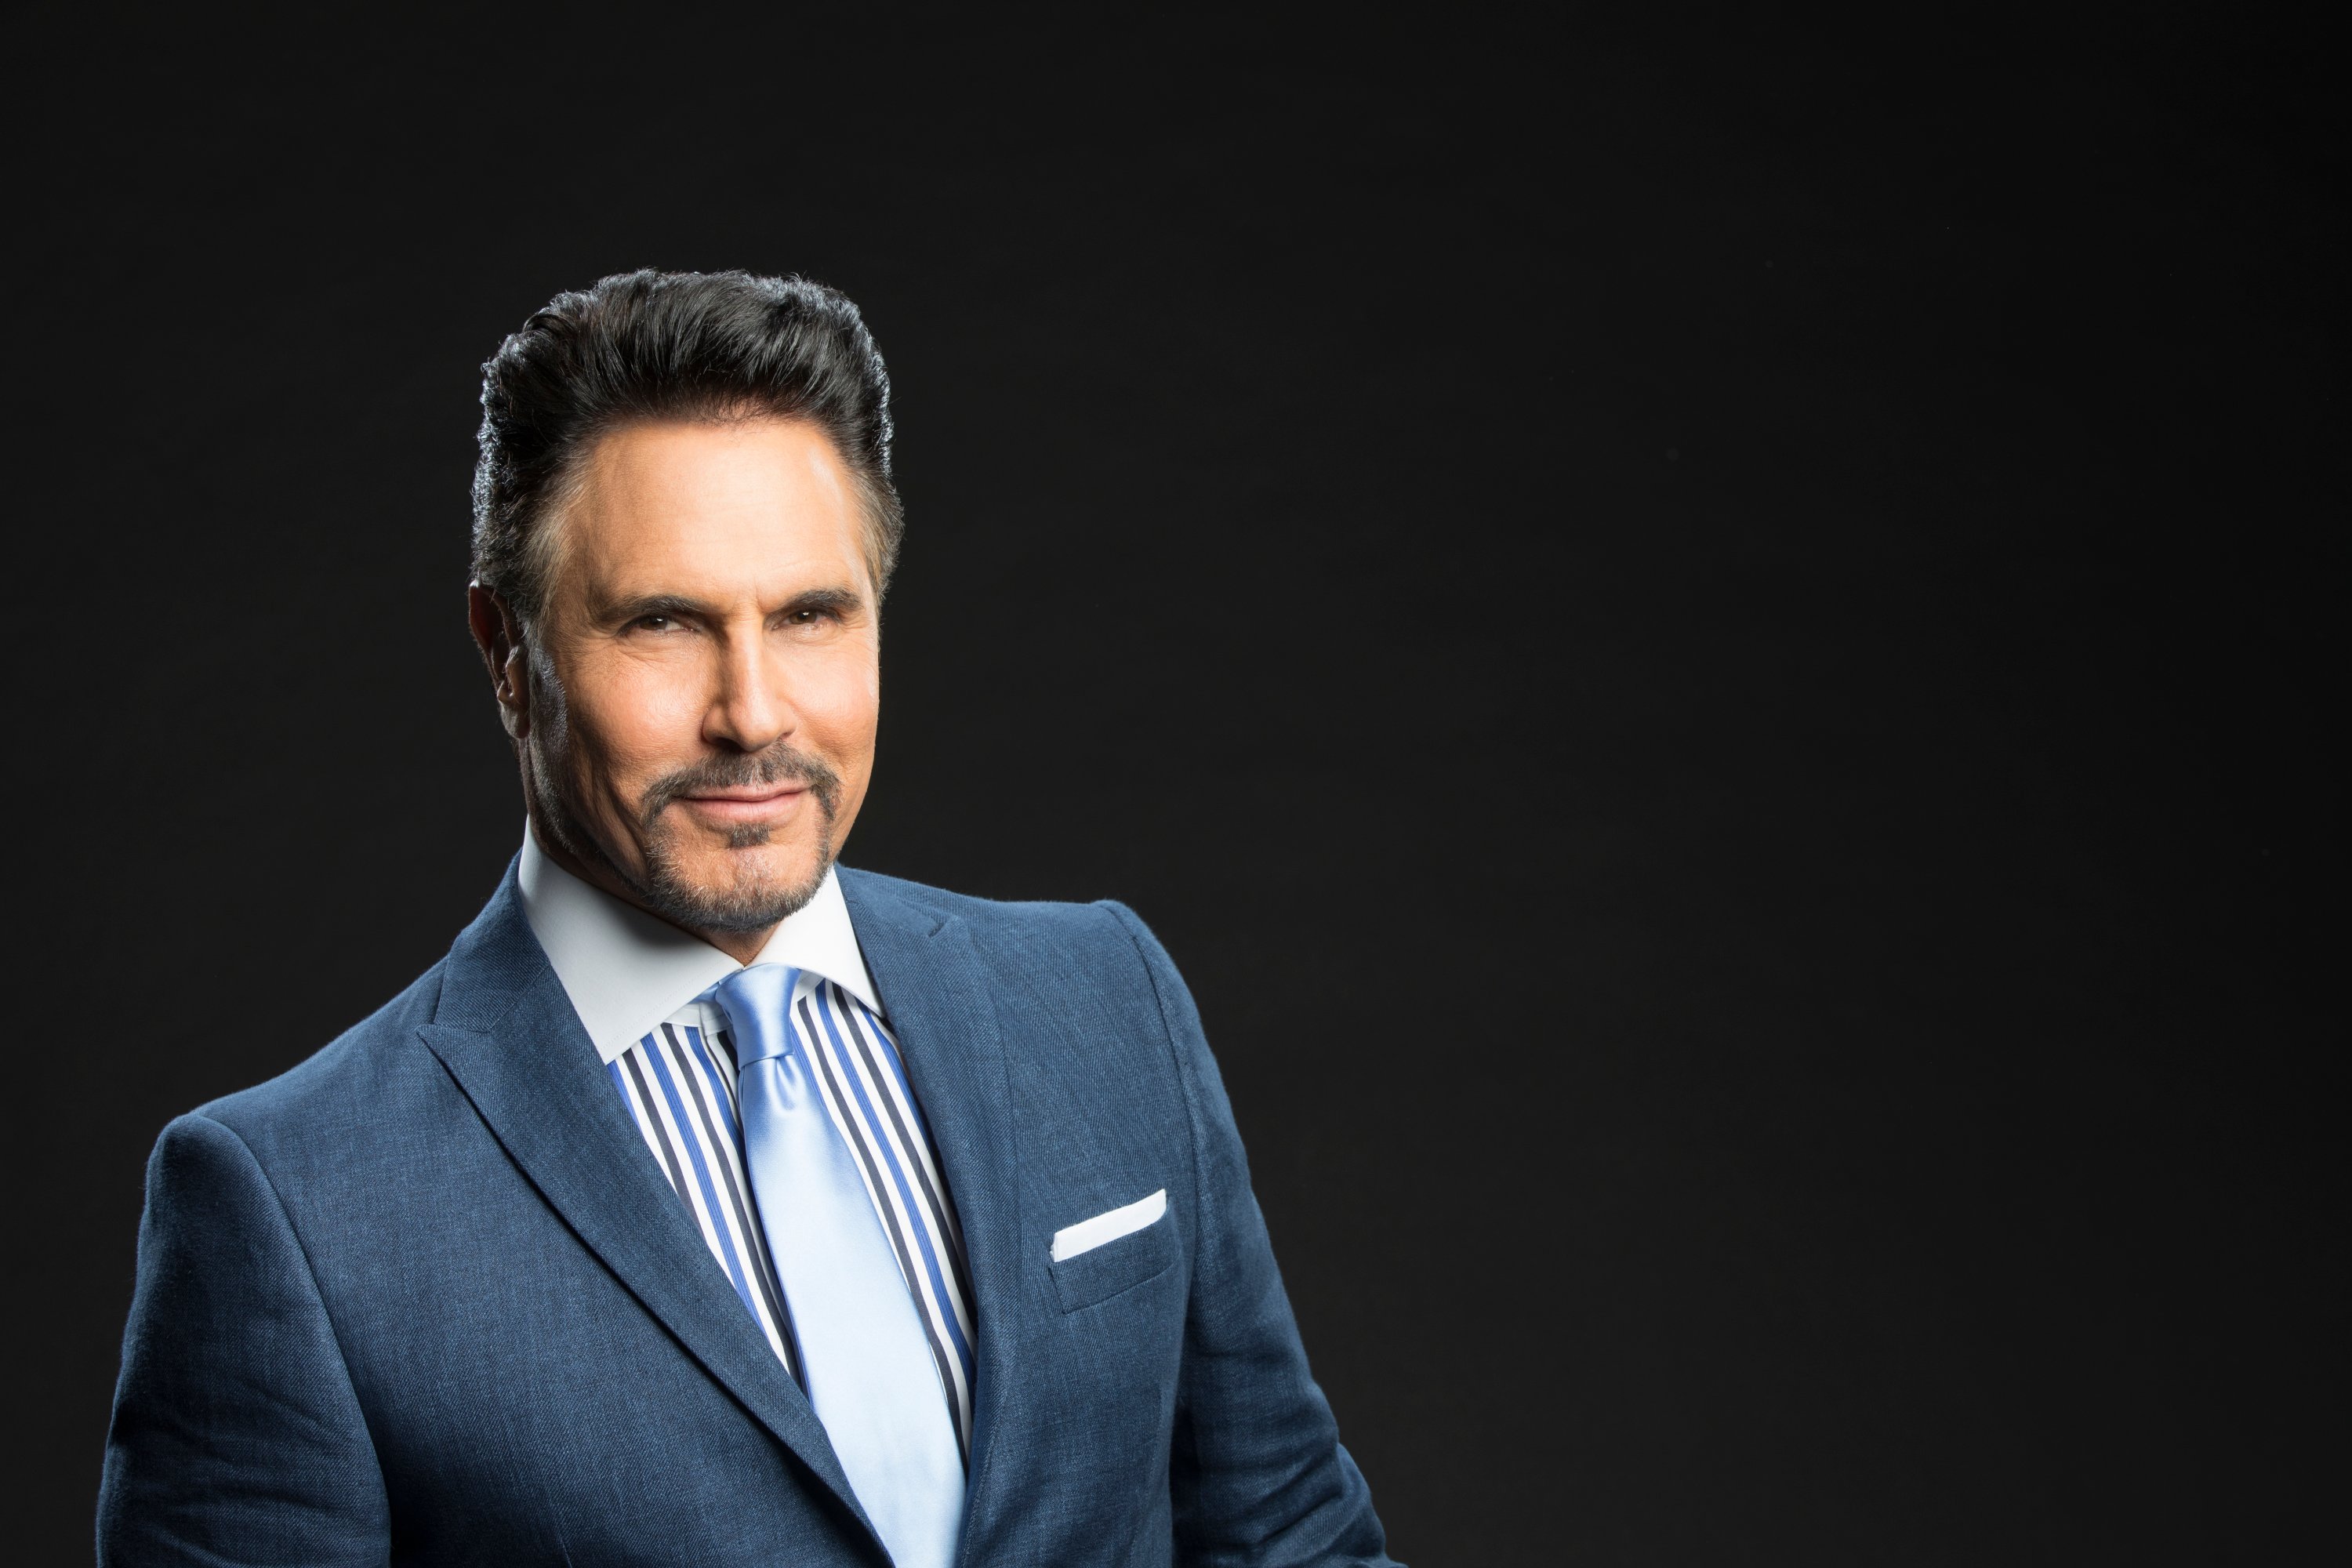 'The Bold and the Beautiful' actor Don Diamont wearing a blue suit and standing in front of a black backdrop.